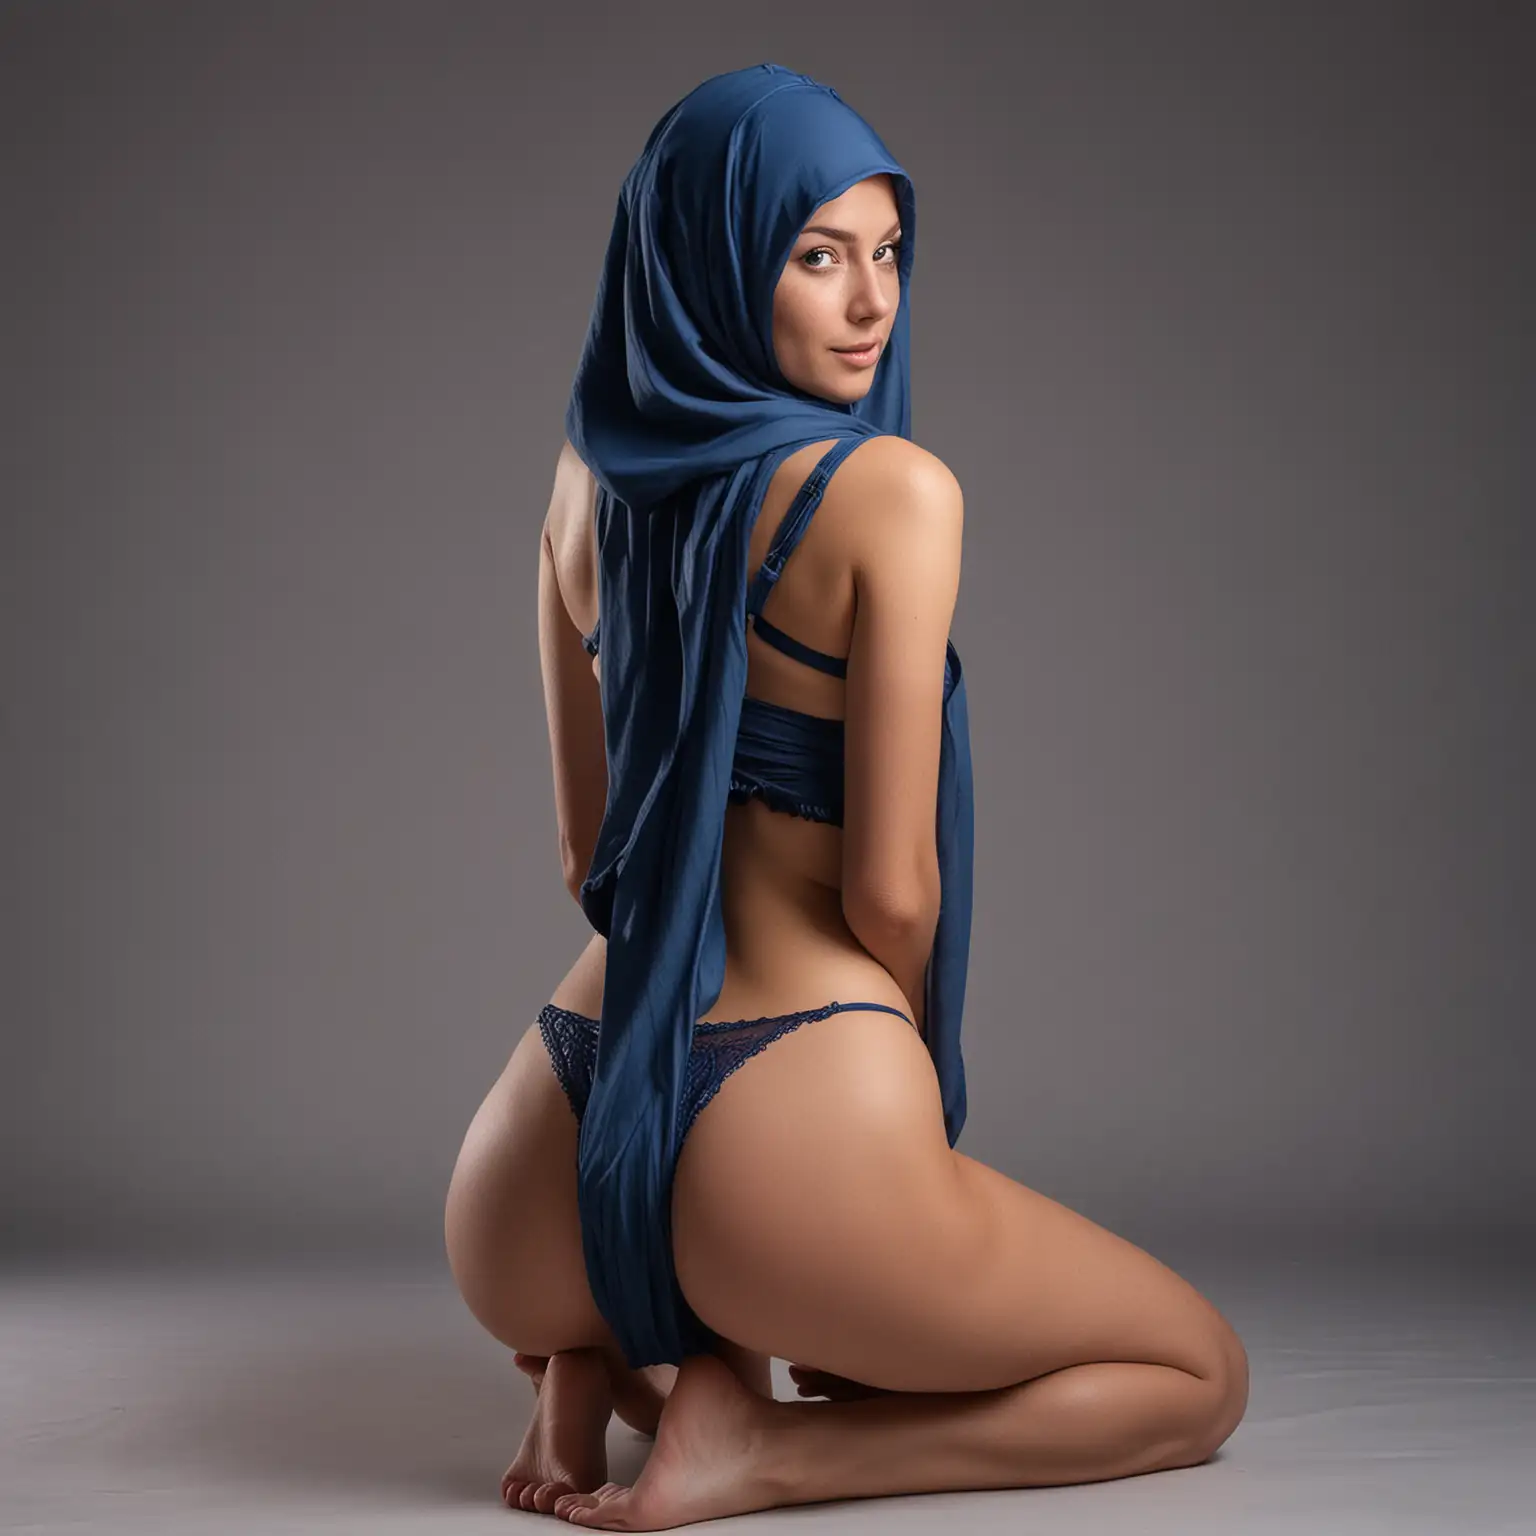 Mysterious Studio Portrait Young Woman in Blue Burka Squatting